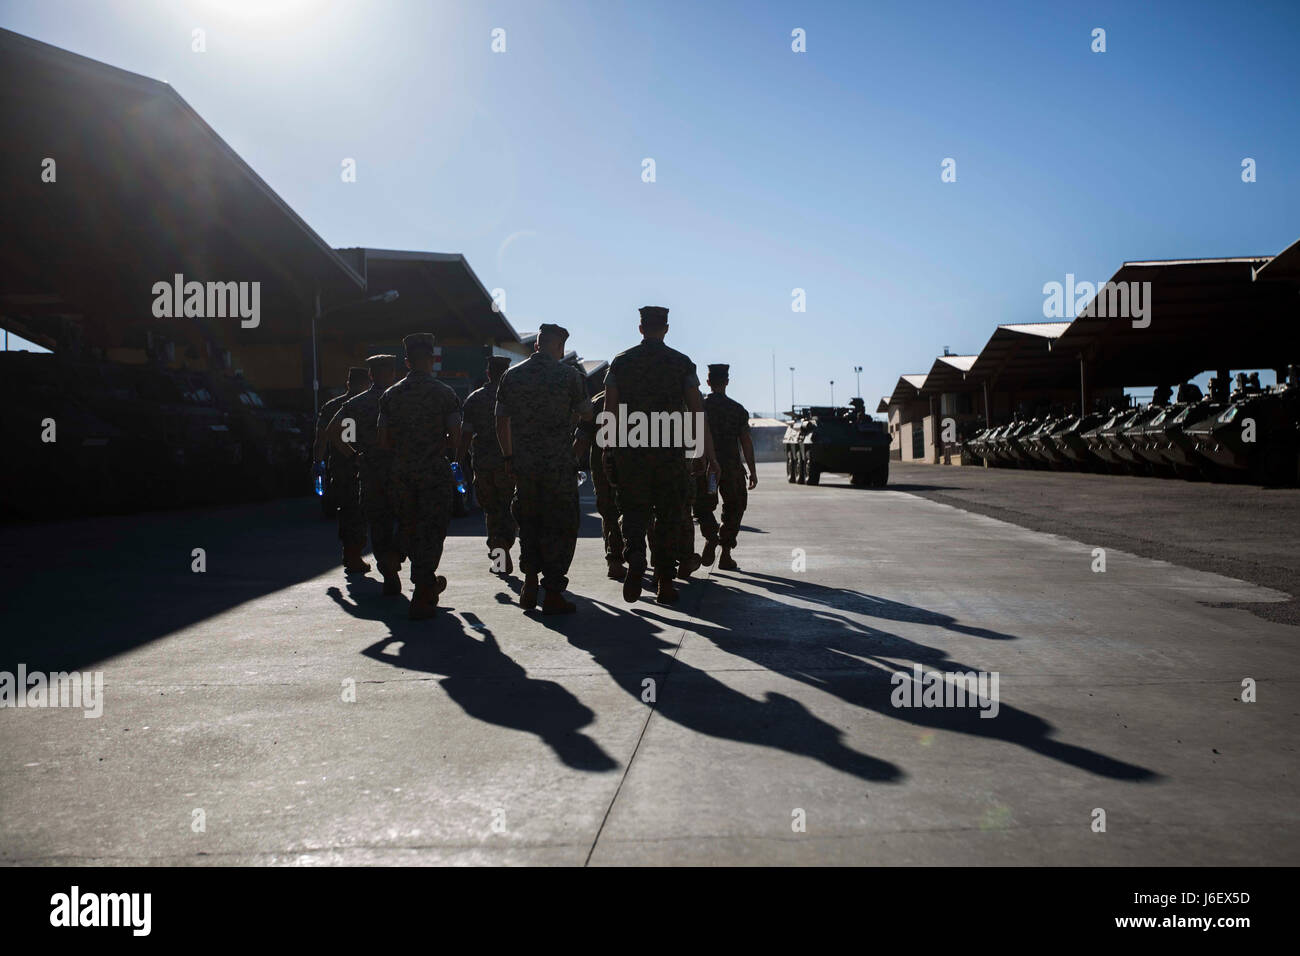 Marines assigned to Special Purpose Marine Air-Ground Task Force-Crisis Response-Africa combat logistics element receive a tour of La Legión Base Militar, Viator, Spain, April 8, 2017. SPMAGTF-CR-AF deployed to conduct limited crisis response and theater security operations in Europe and North Africa. (U.S. Marine Corps Photo by Cpl. Jodson B. Graves) Stock Photo